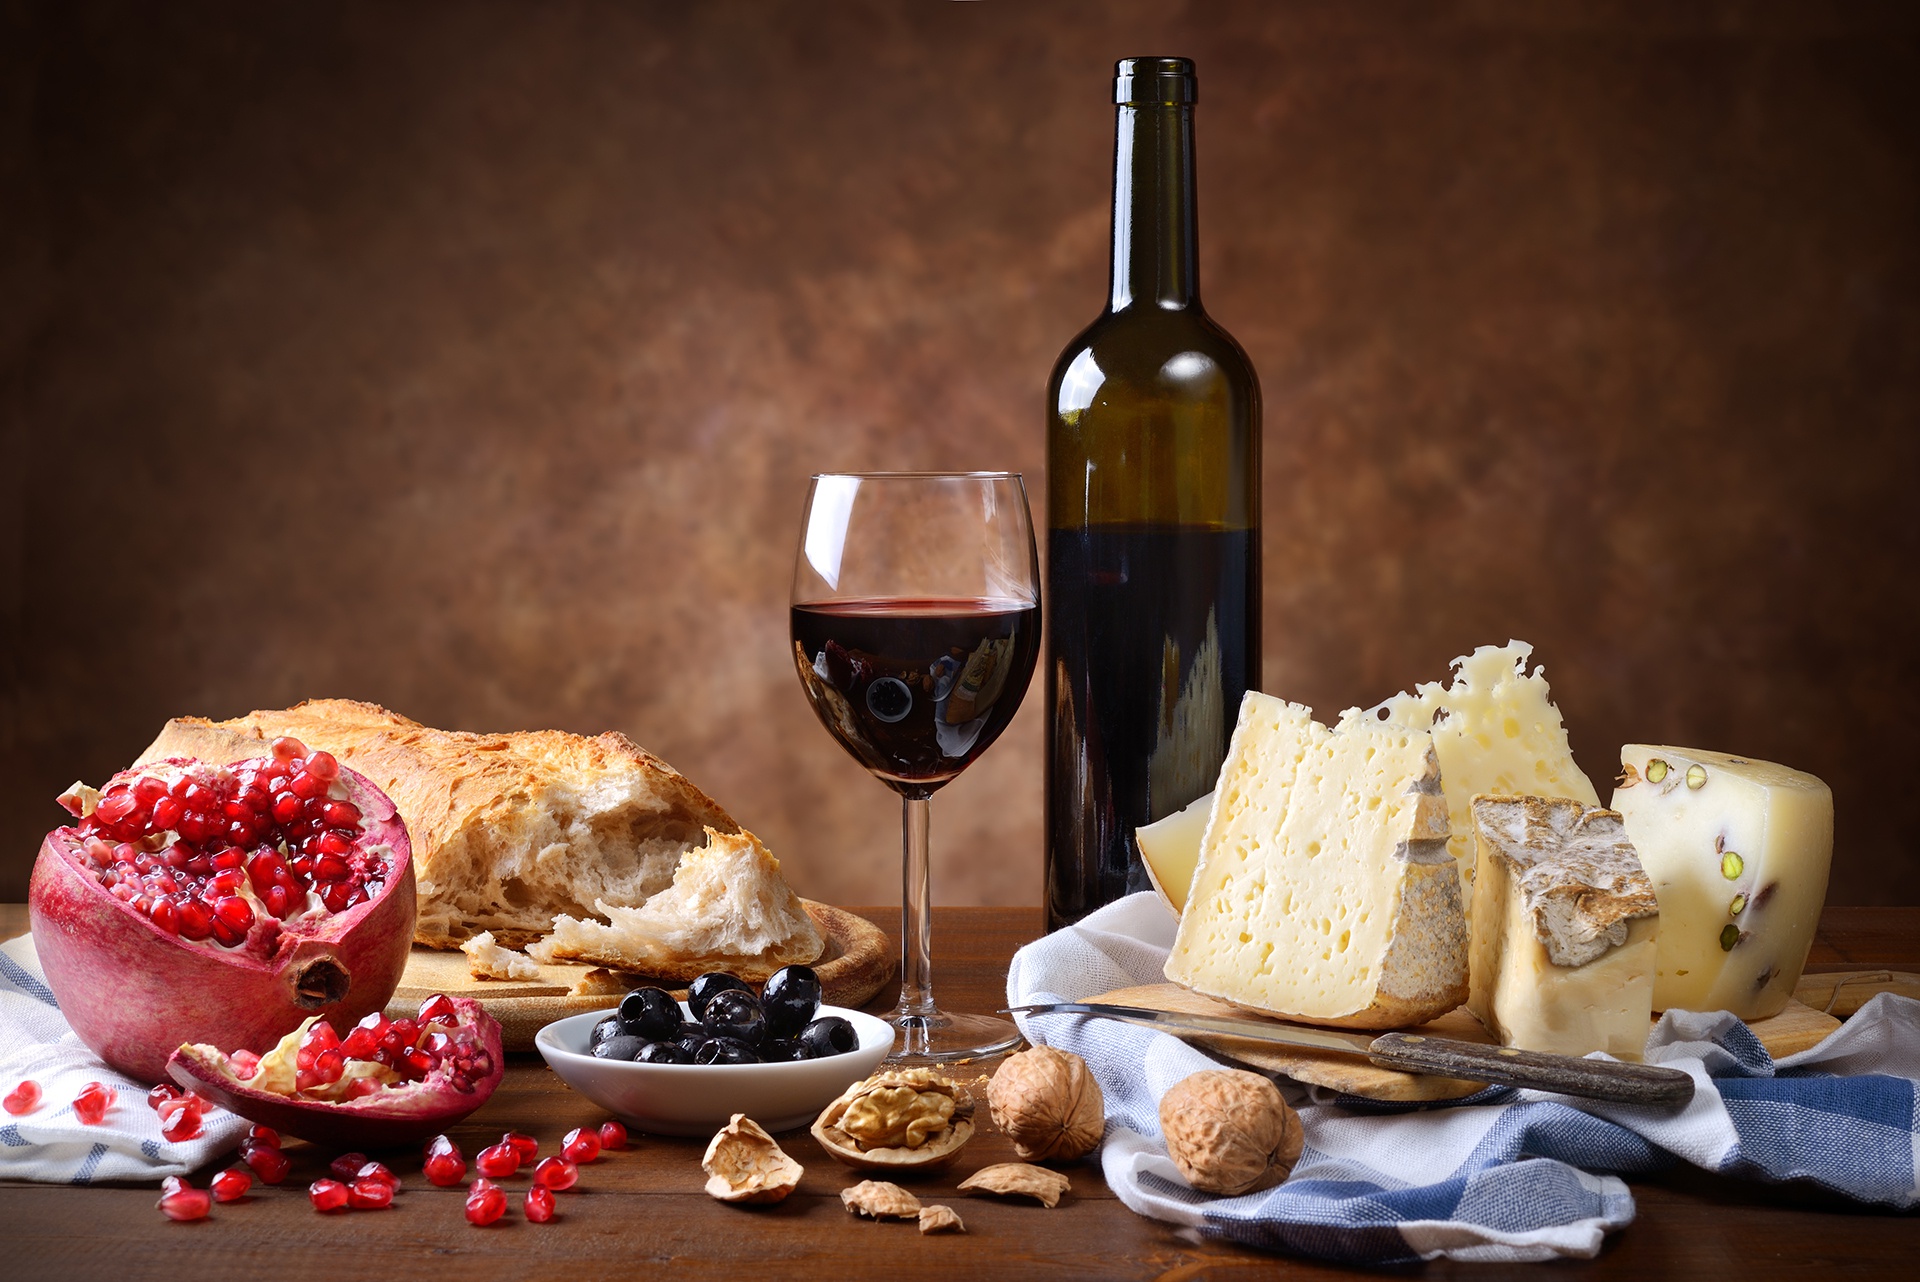 Bottle Bread Cheese Glass Nut Olive Still Life Wine 1920x1282